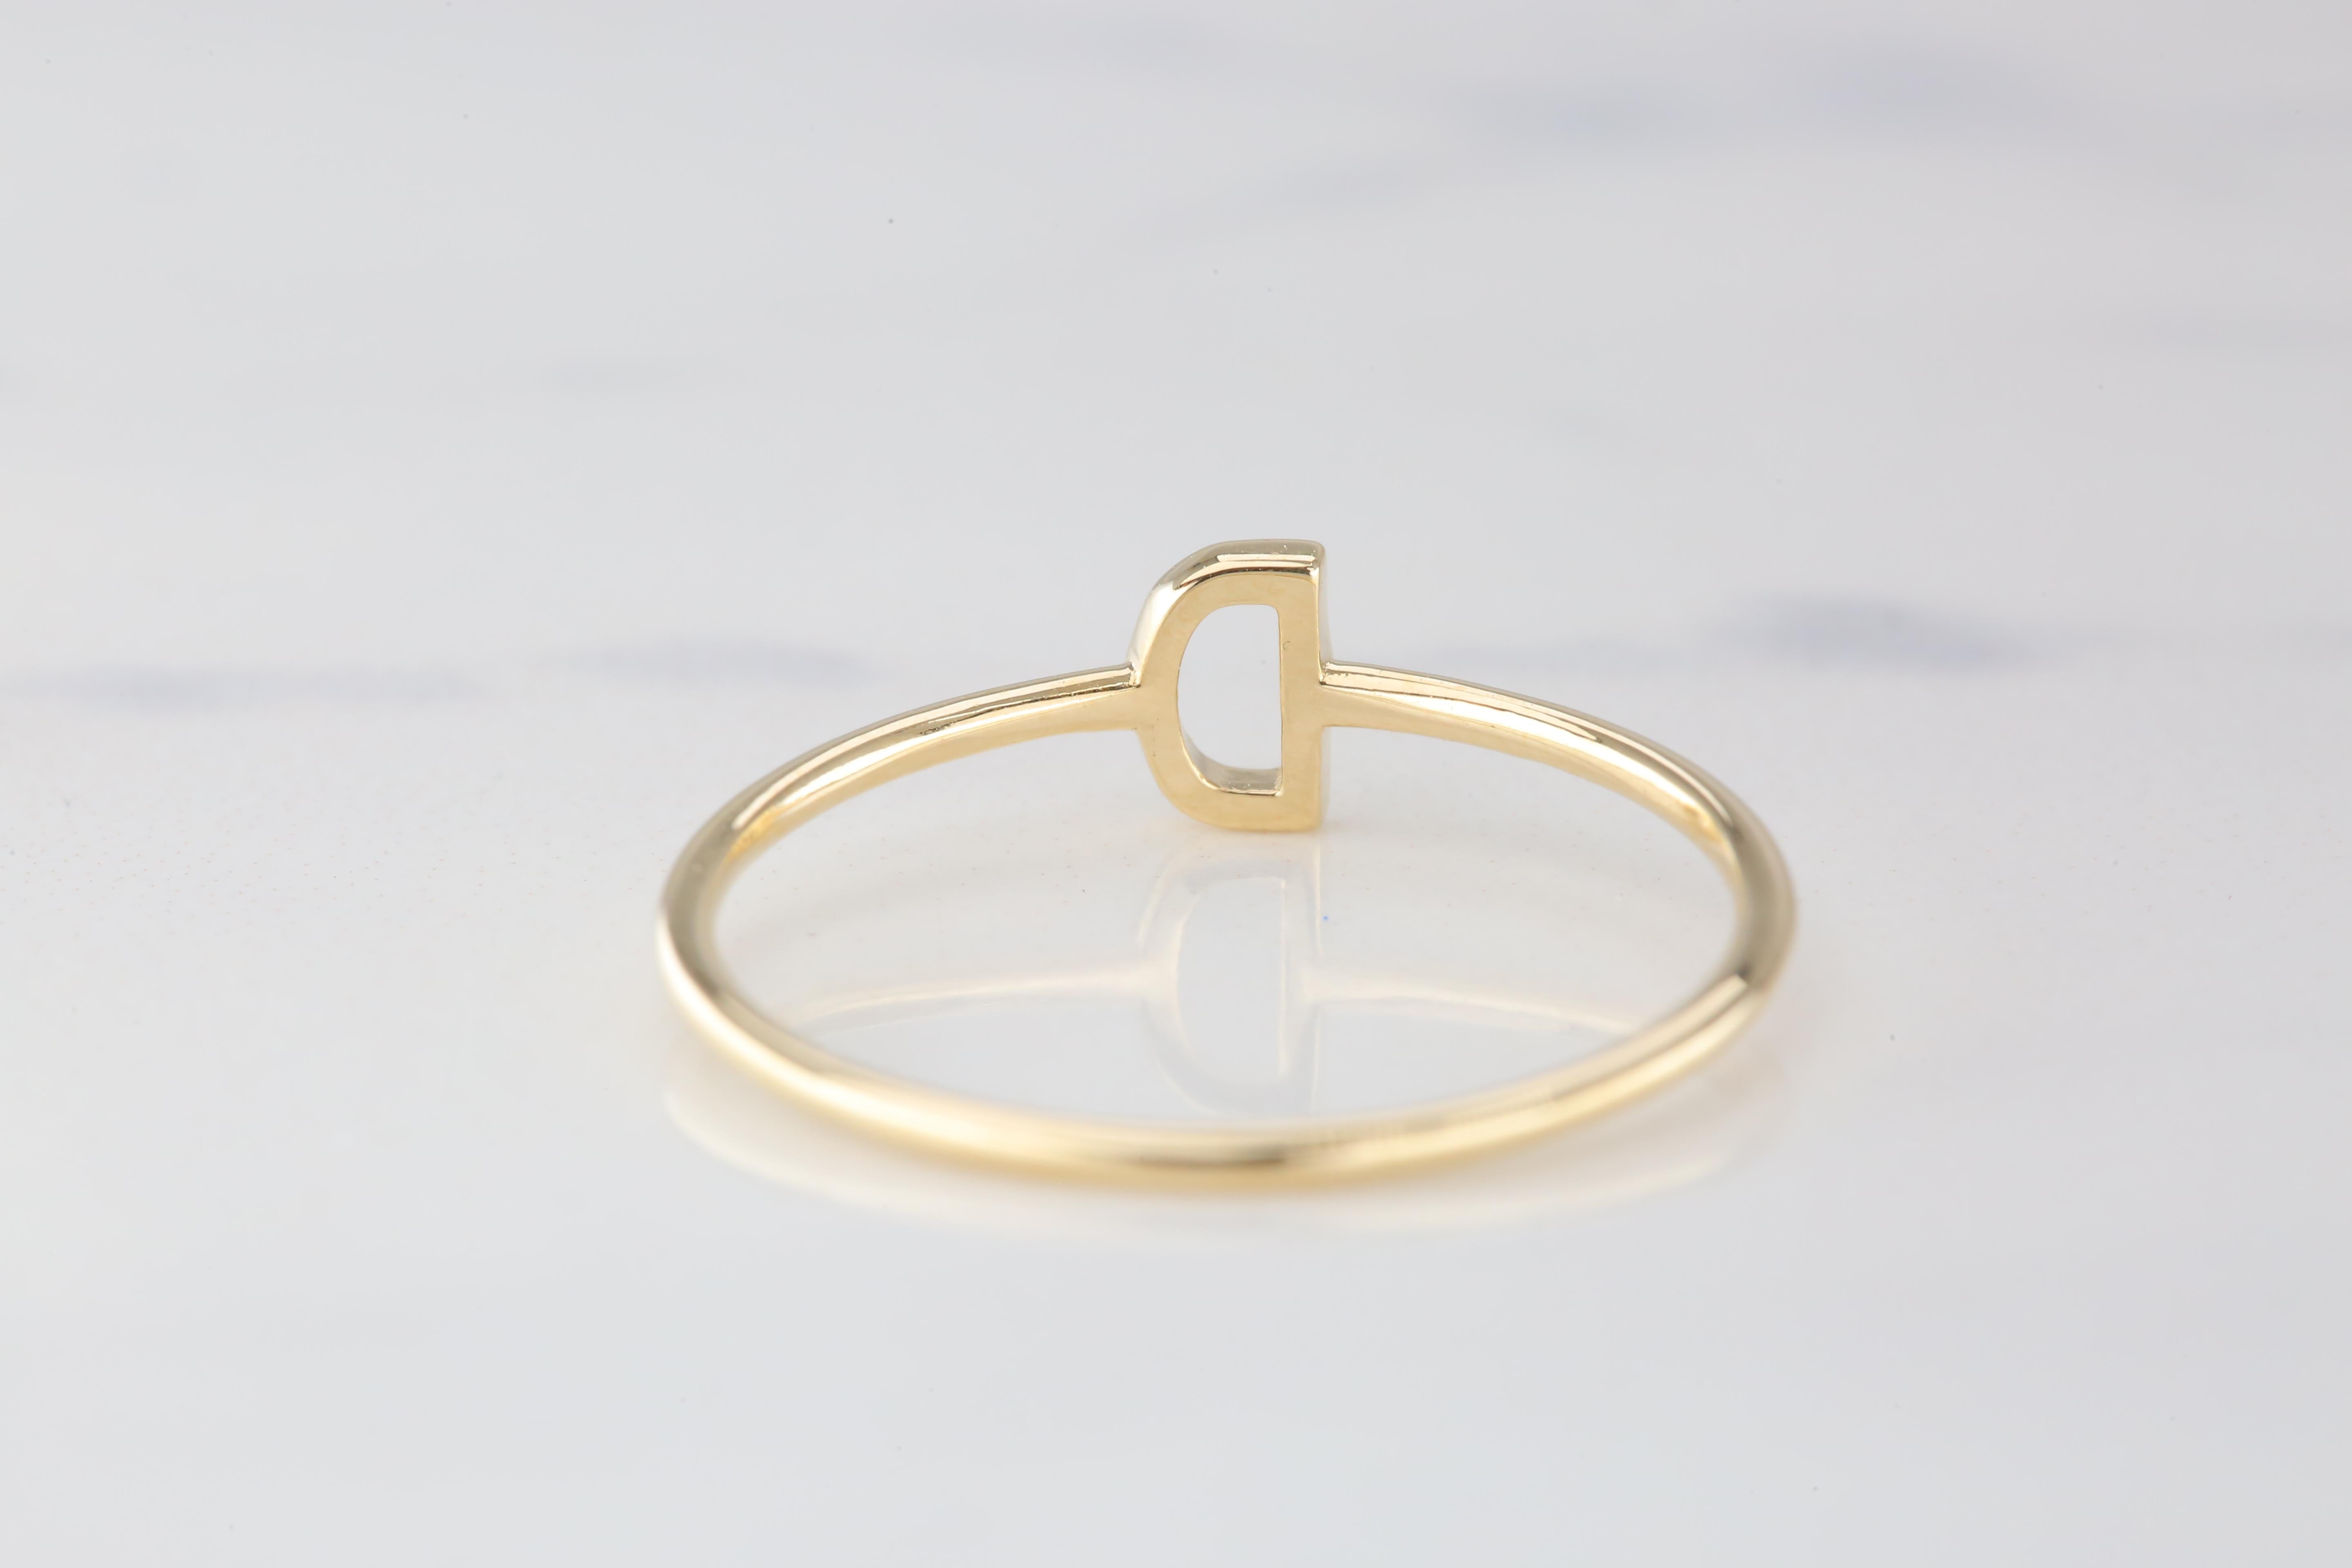 For Sale:  14K Gold Initial D Letter Ring, Personalized Initial Letter Ring 6